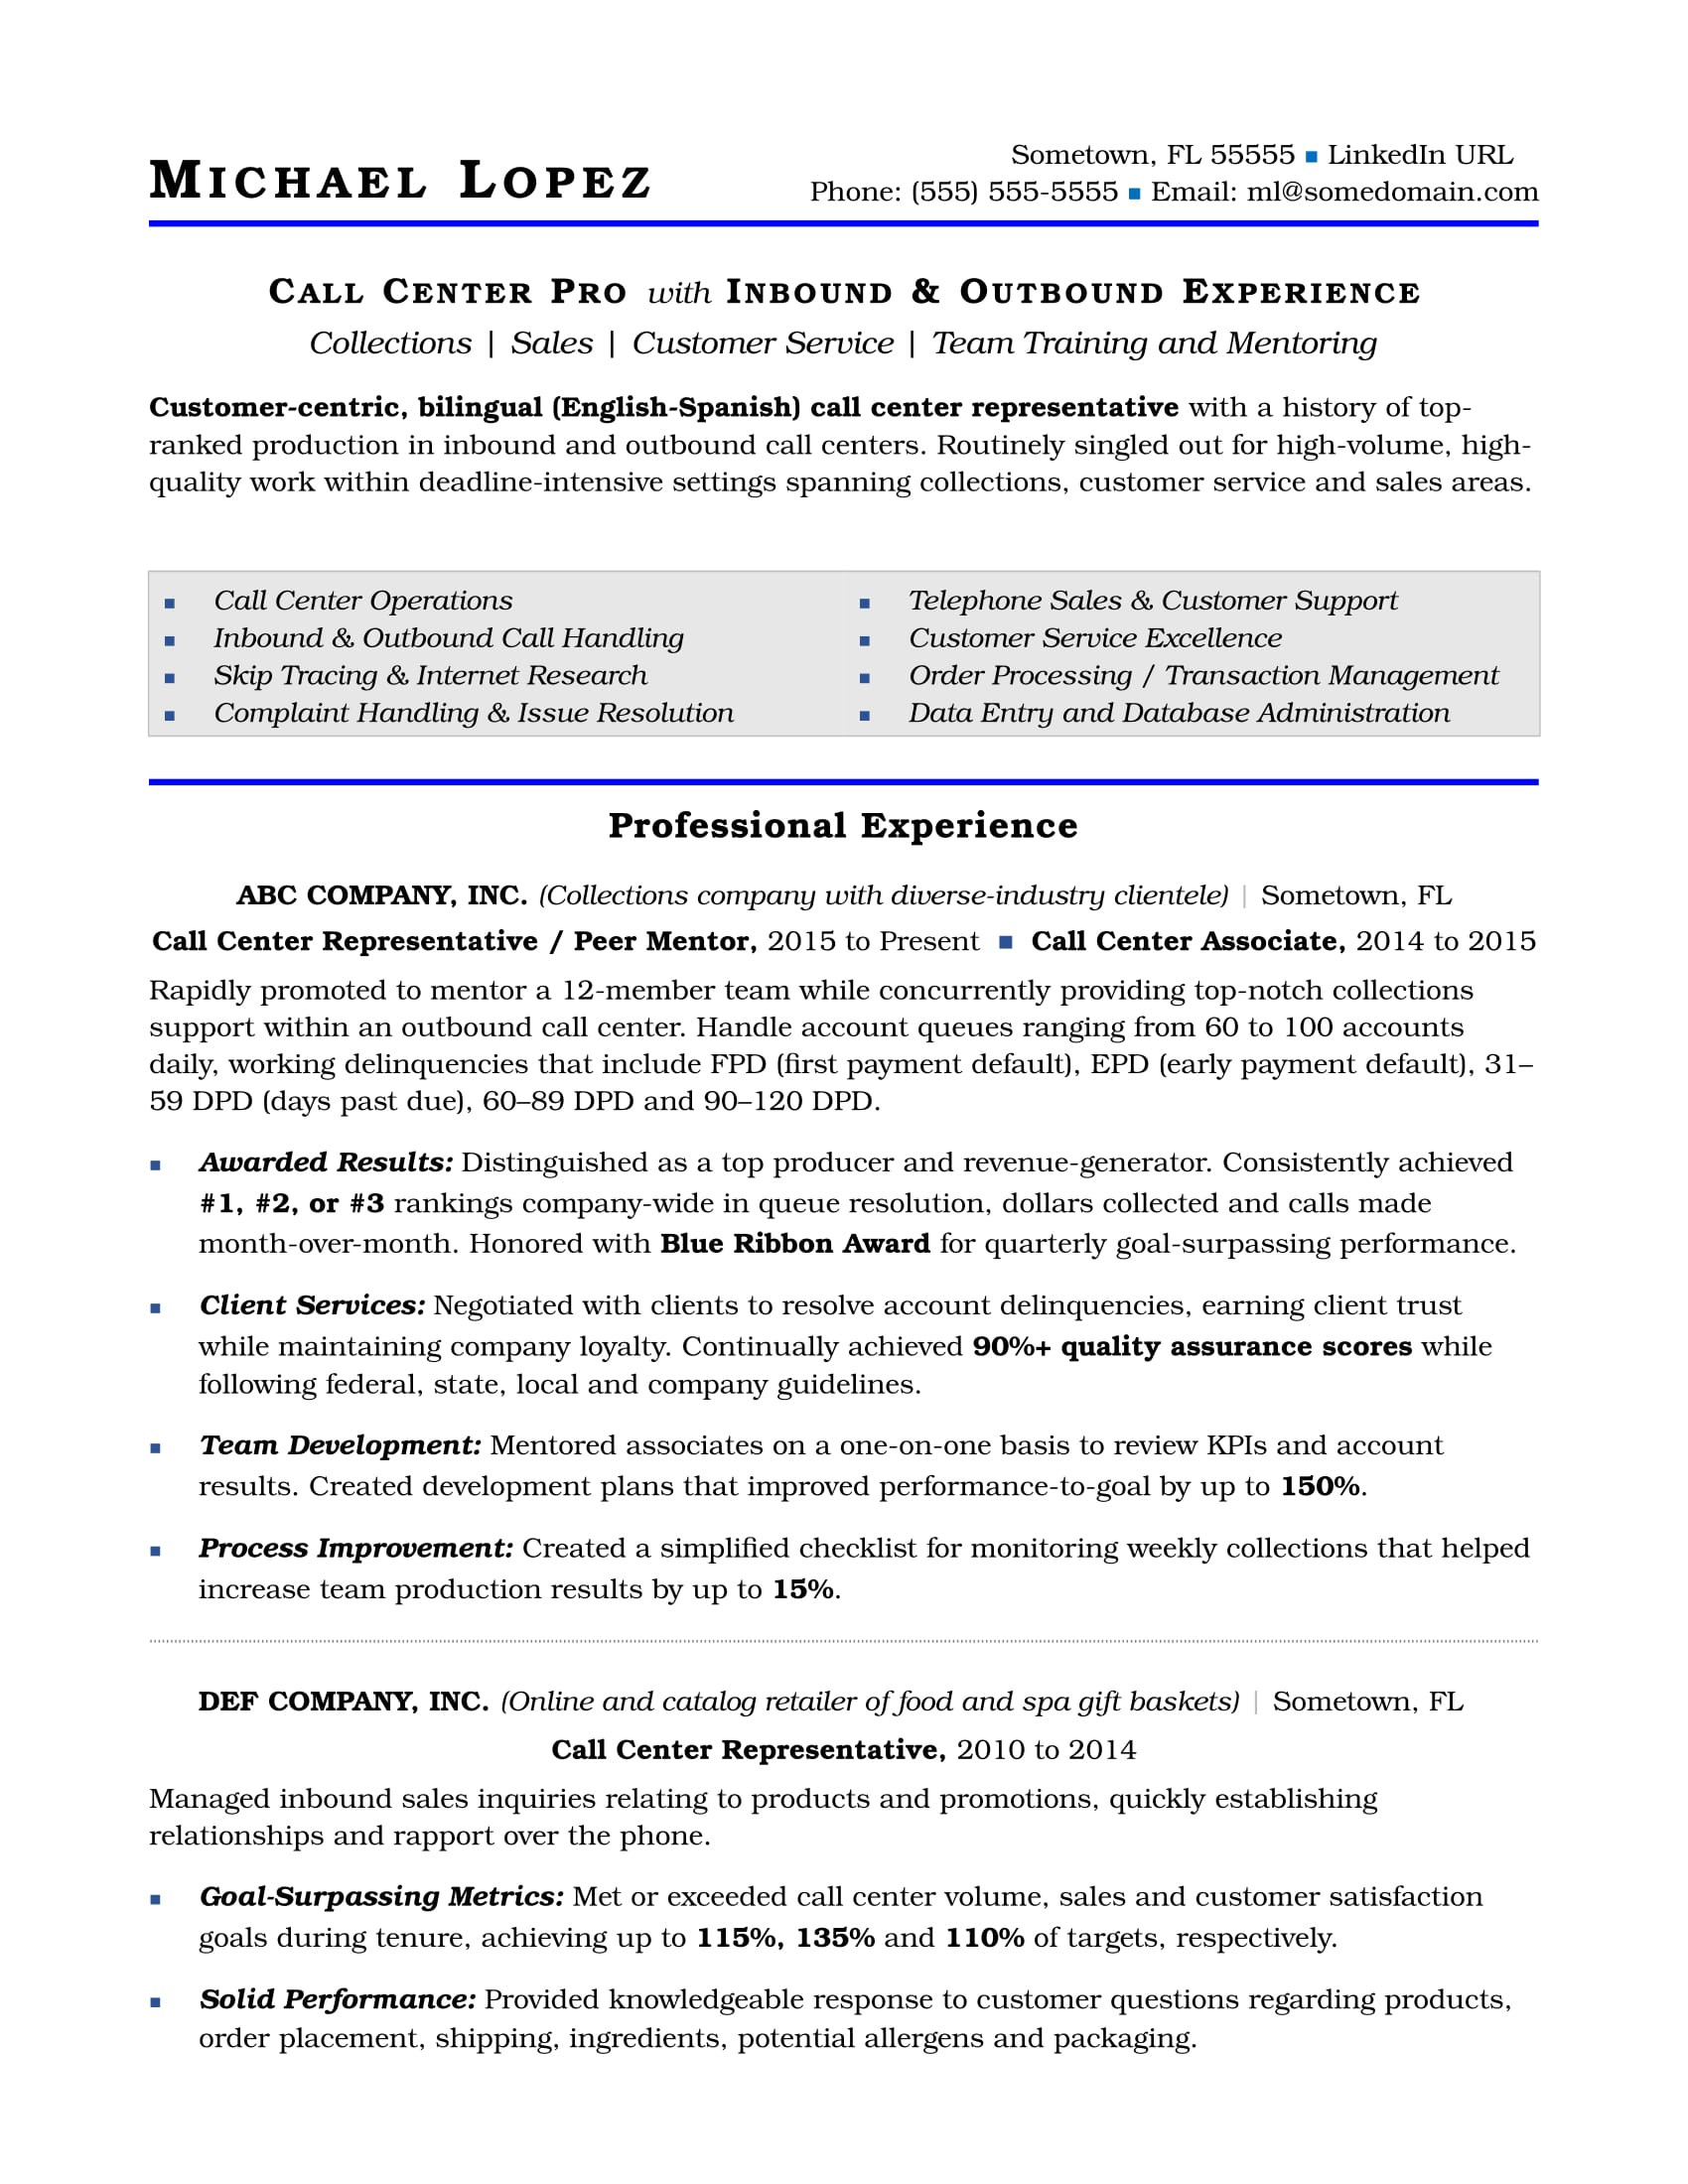 Resume Samples for Customer Service Call Center Call Center Resume Sample Monster.com